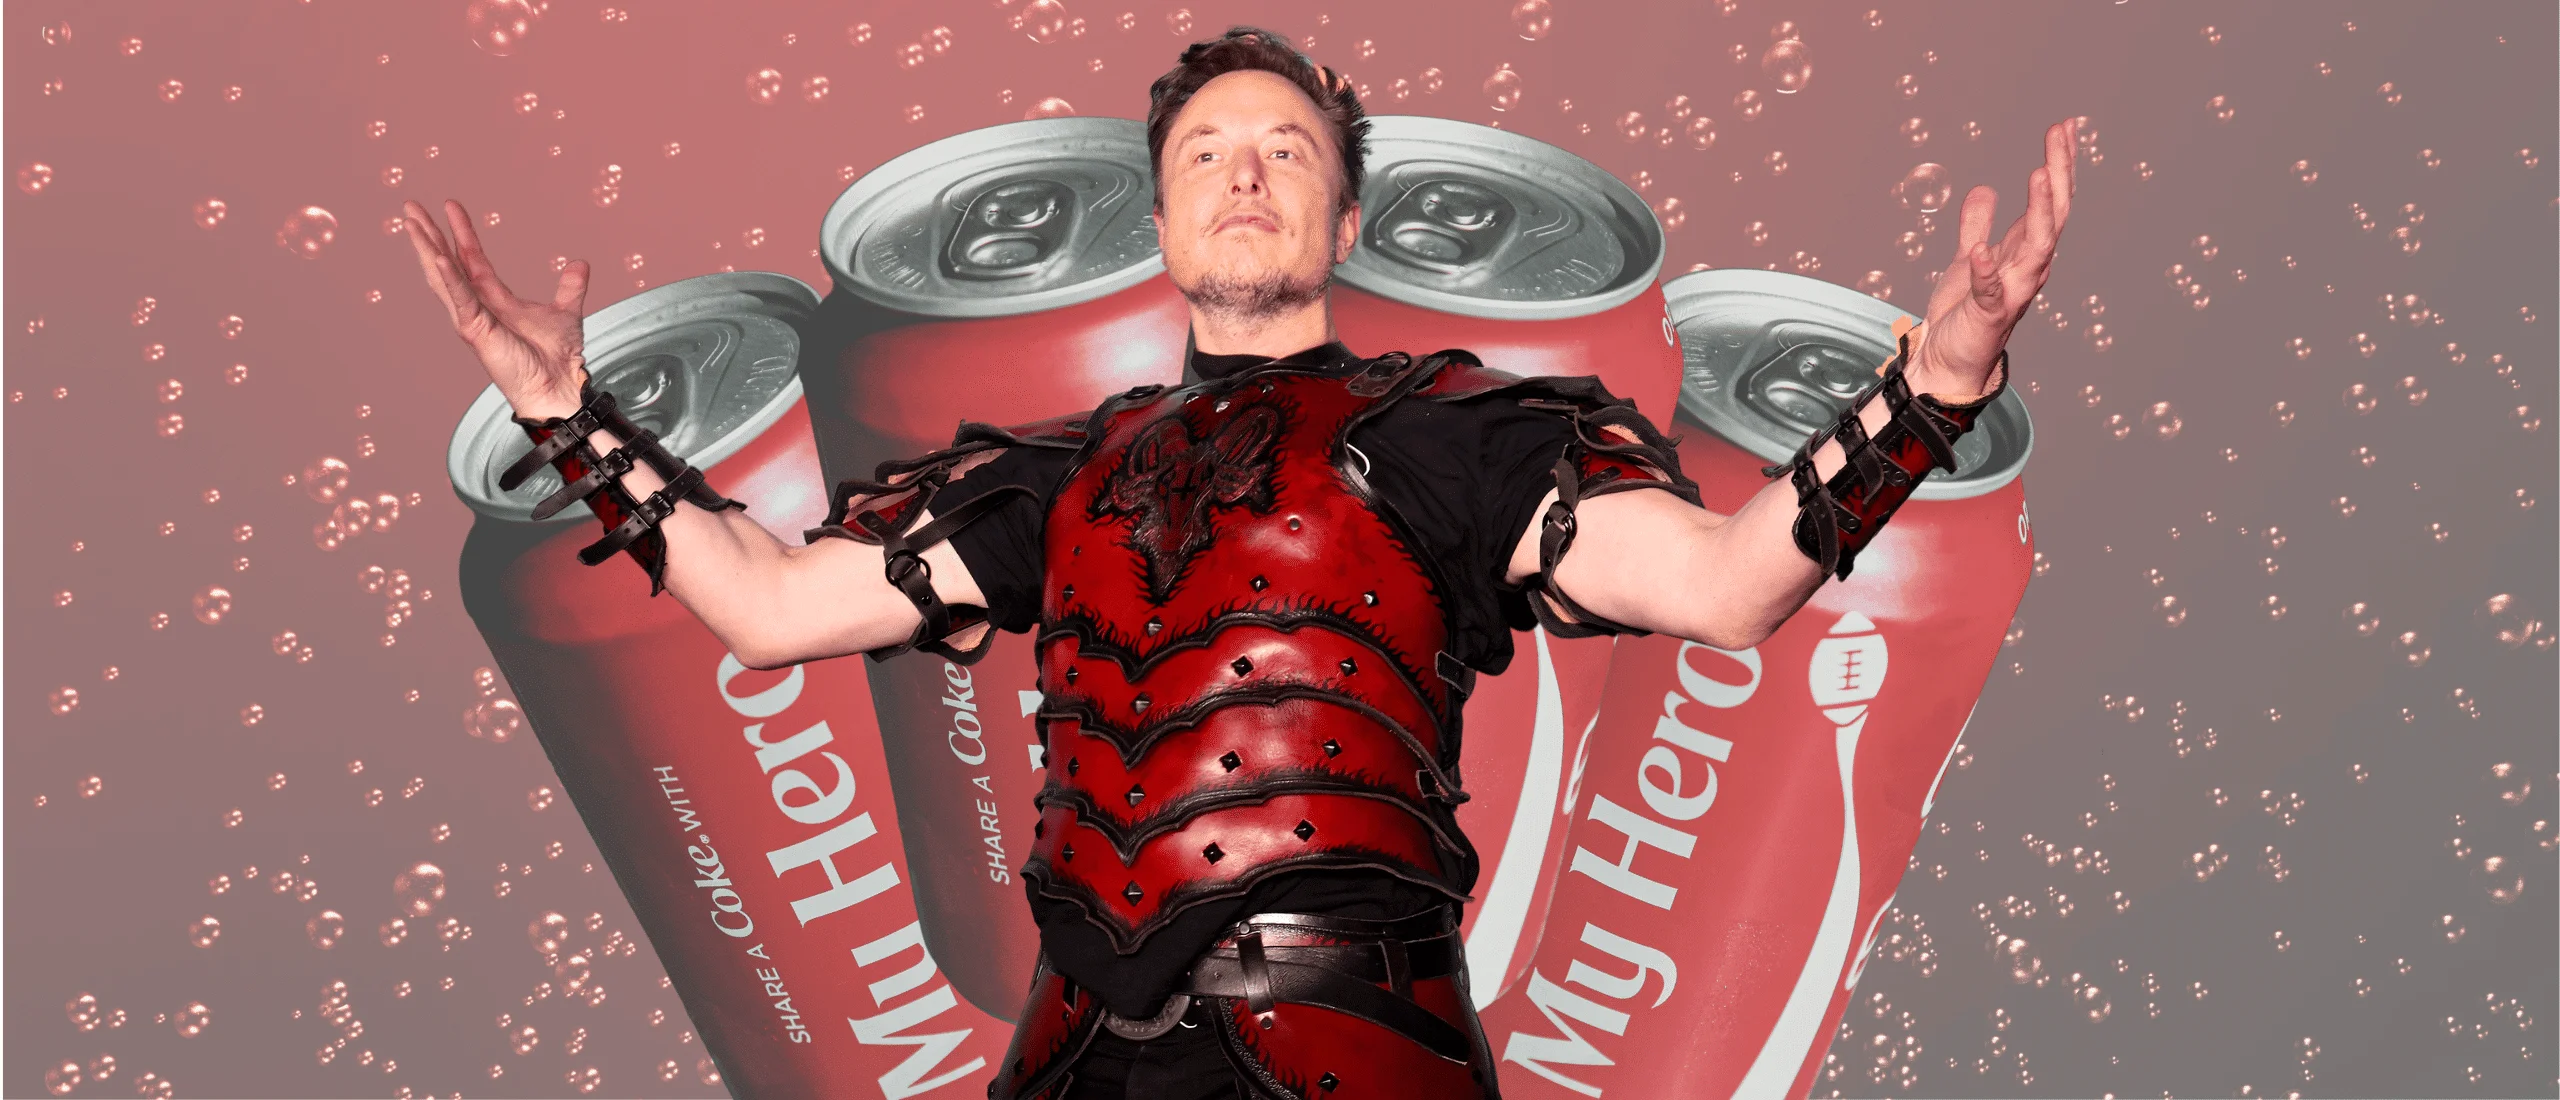 Elon Musk, in front of several cans of Coke